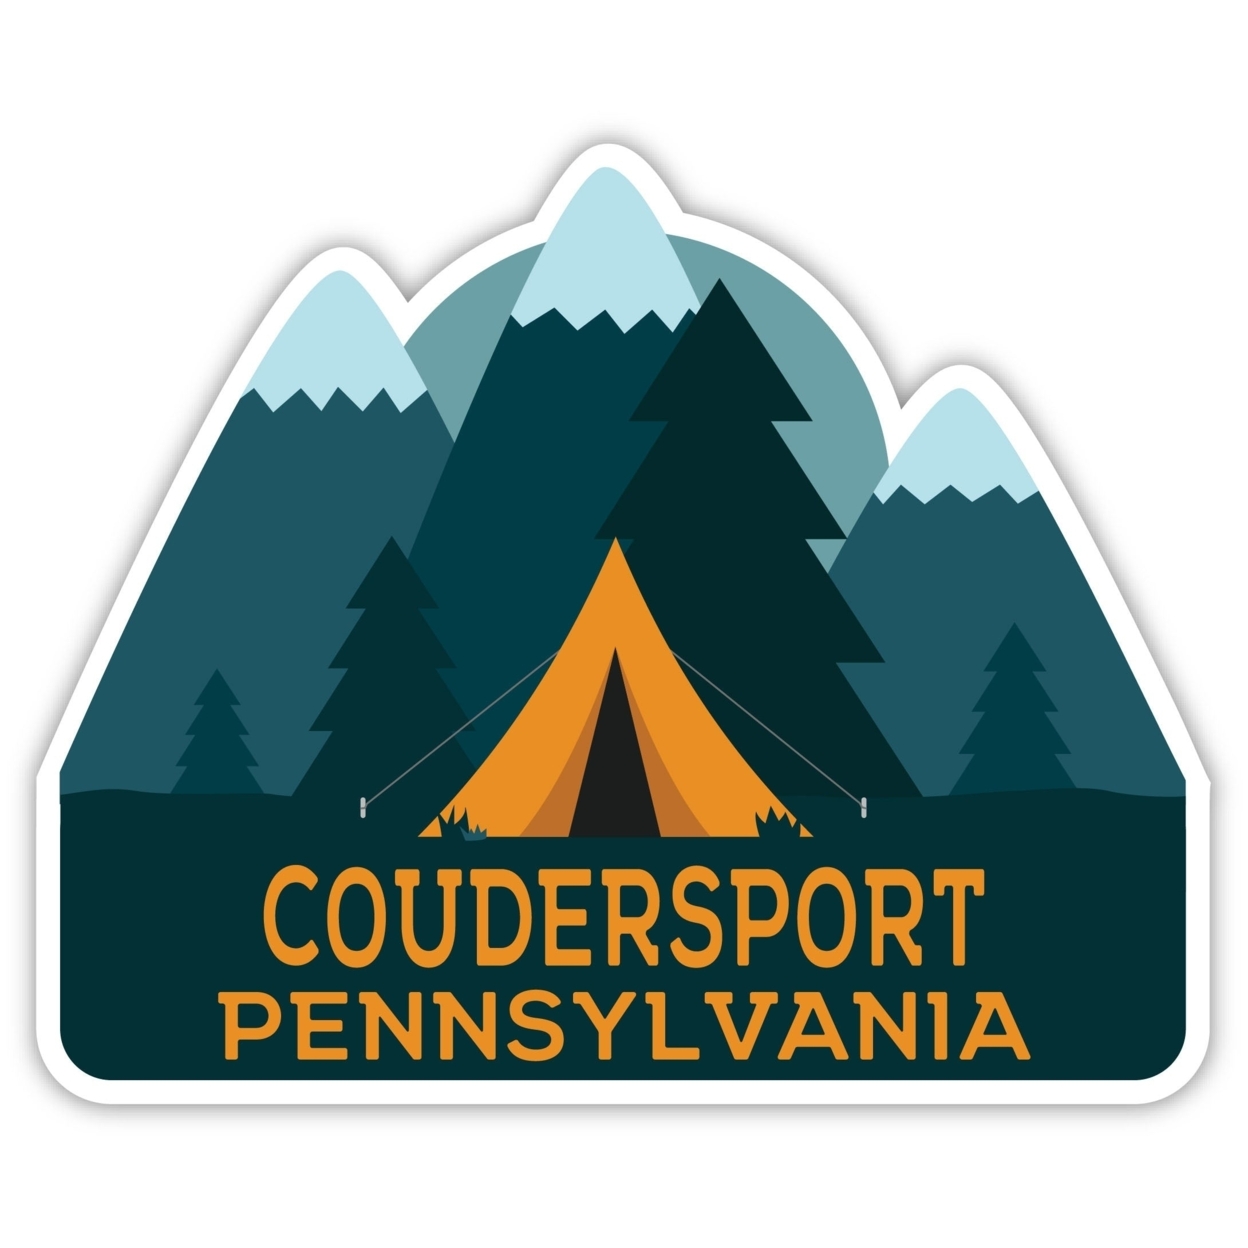 Coudersport Pennsylvania Souvenir Decorative Stickers (Choose Theme And Size) - 4-Pack, 4-Inch, Tent